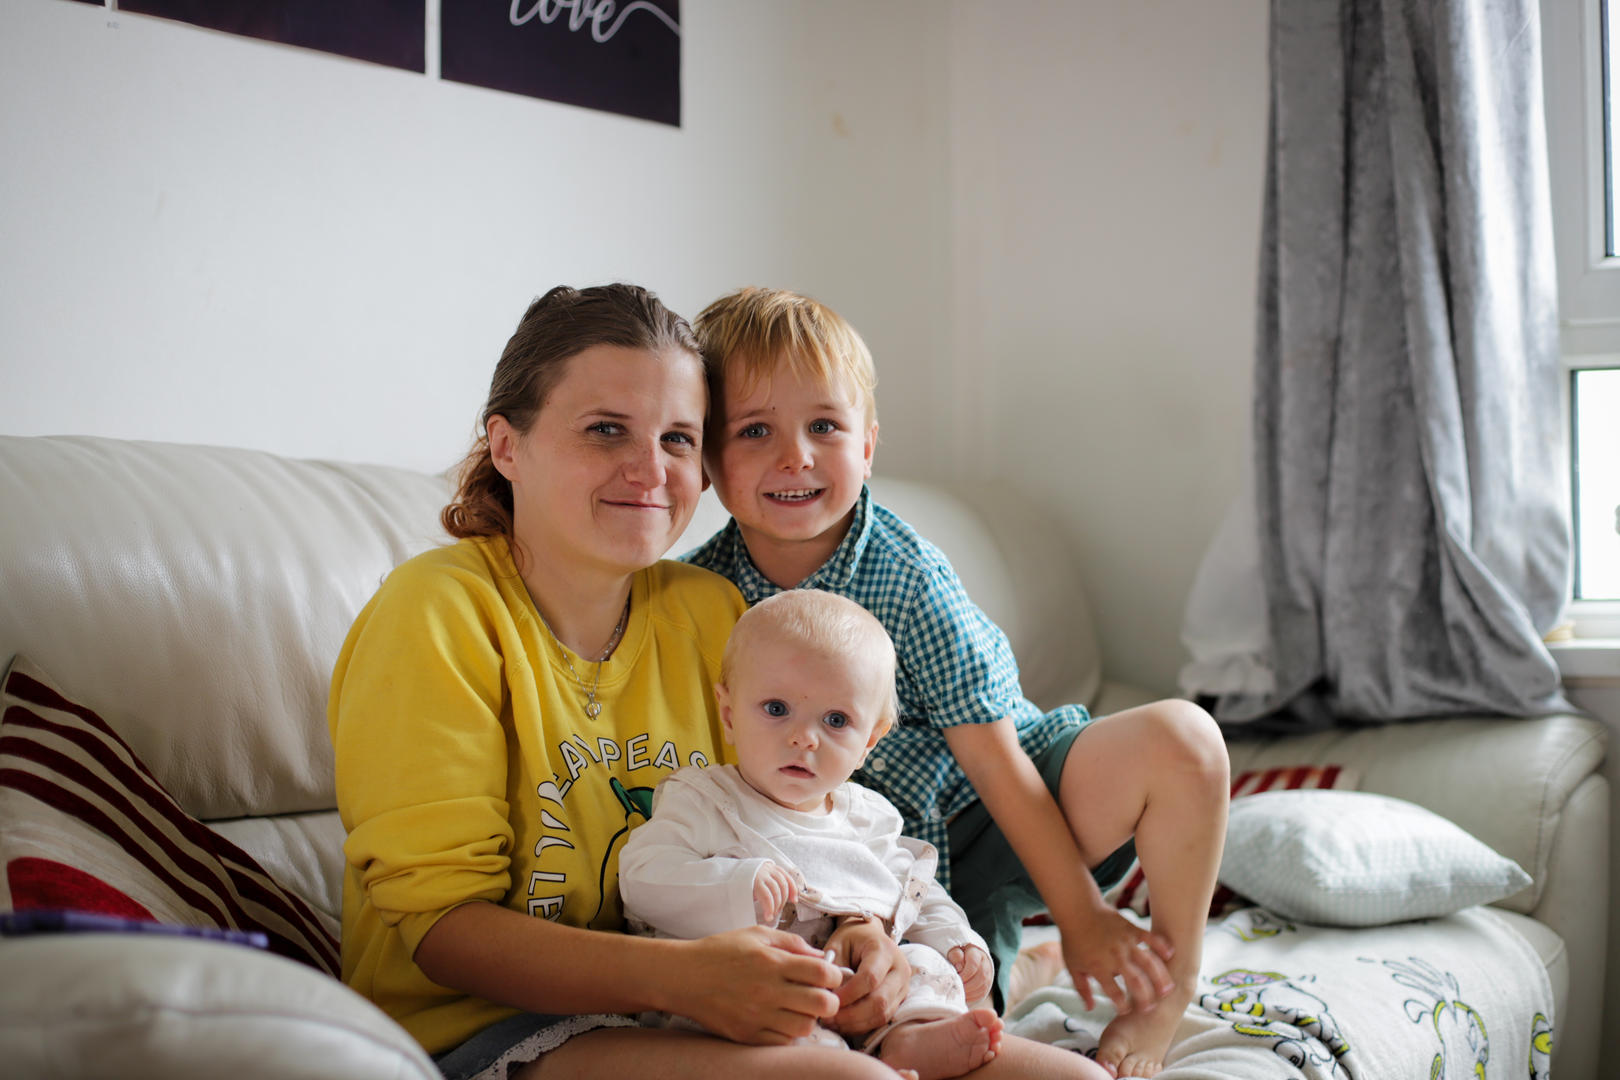 Woman sitting on a sofa with her two small children both who are smiling